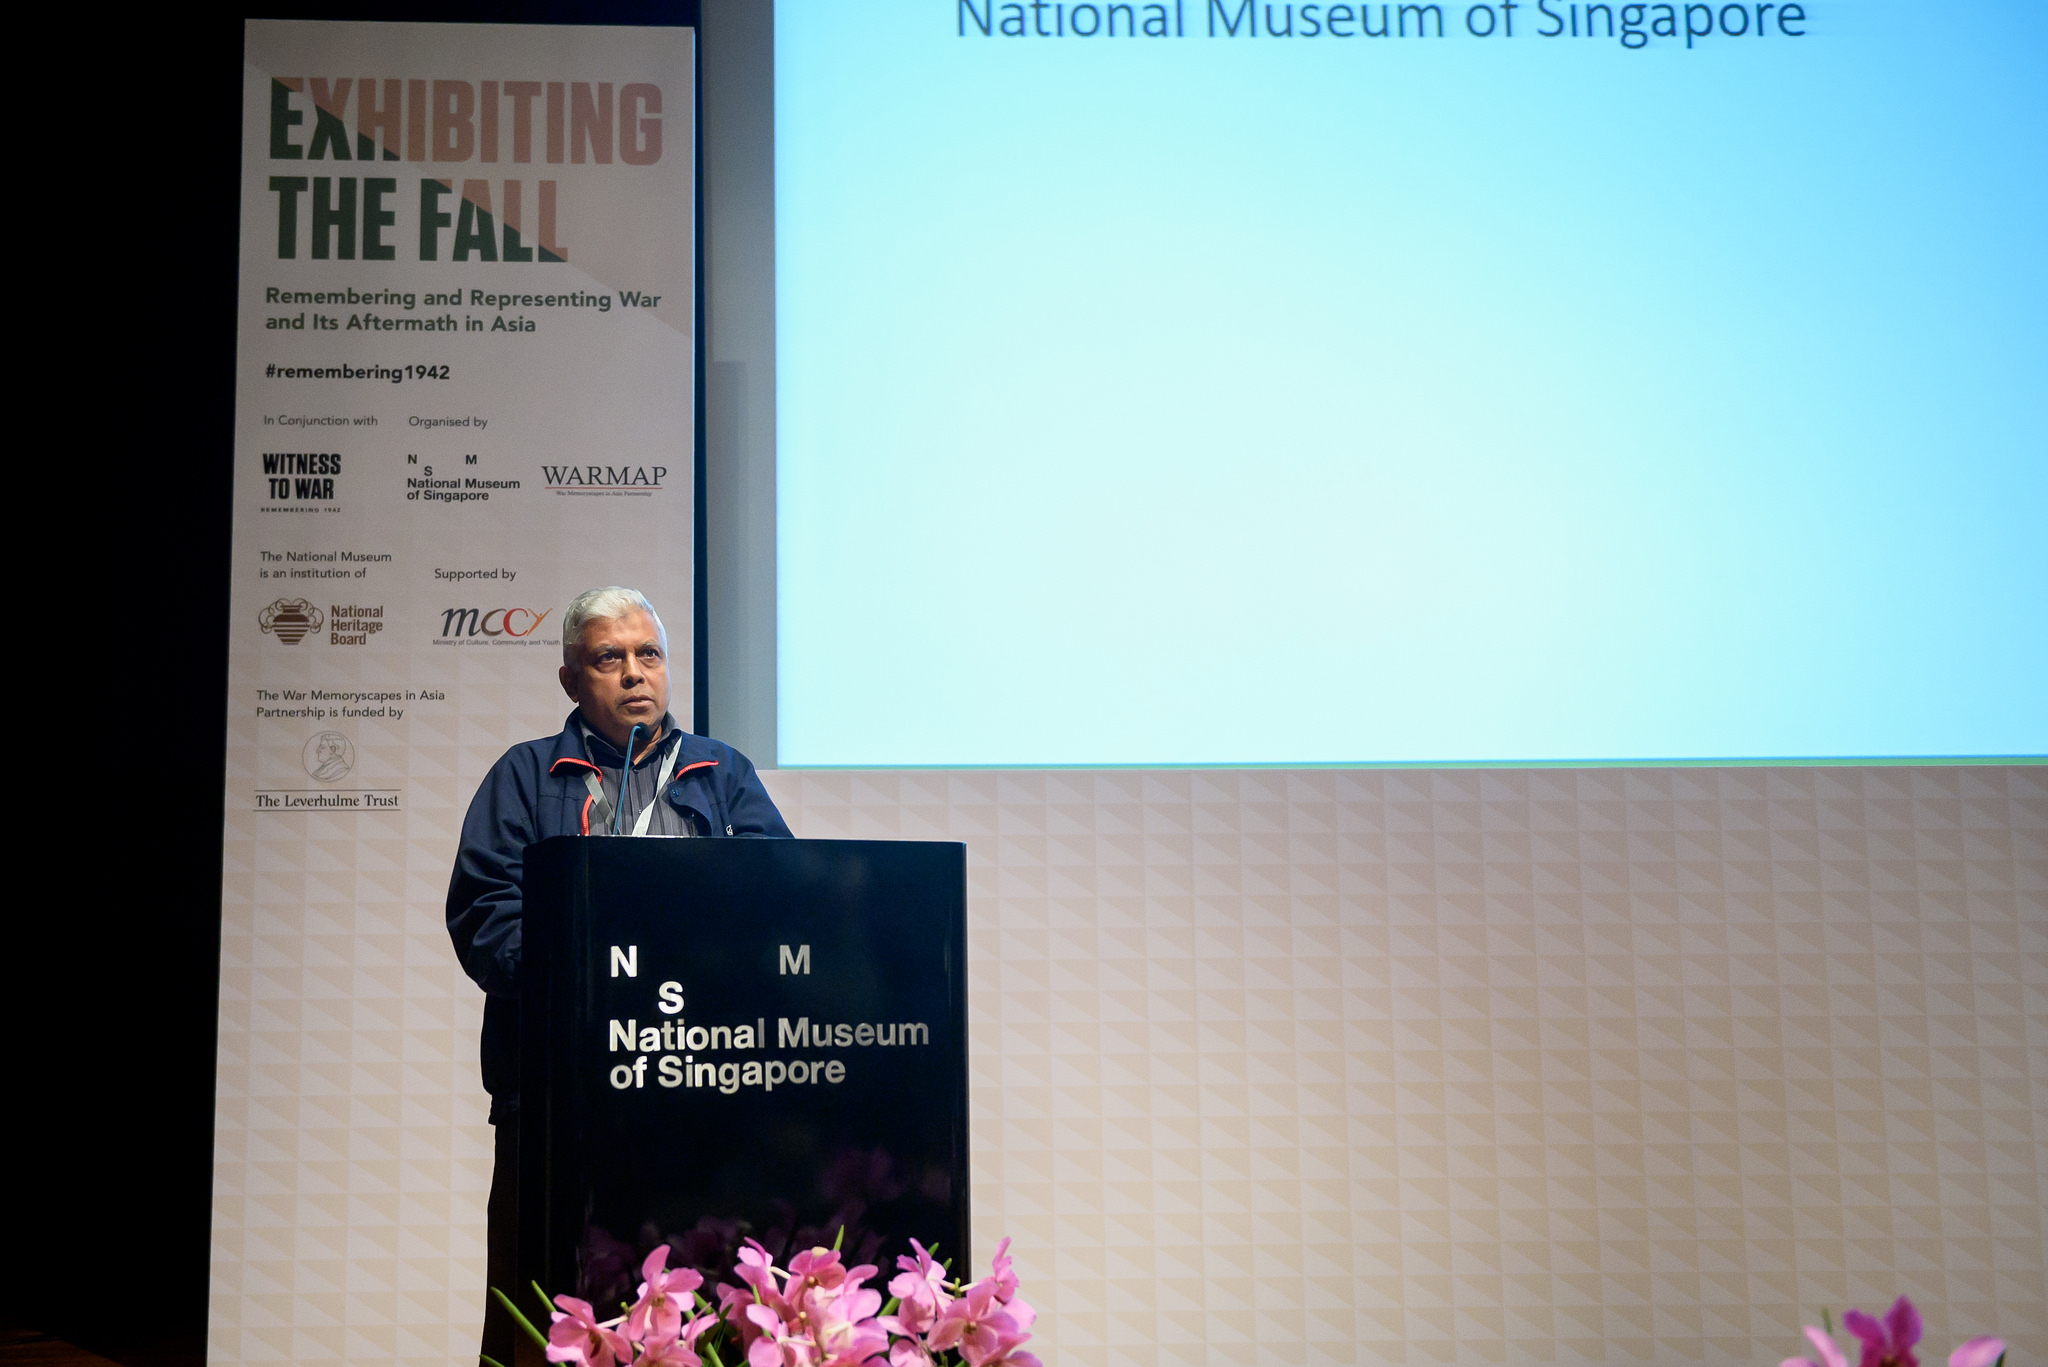 Image courtesy of the National Museum of Singapore, National Heritage Board